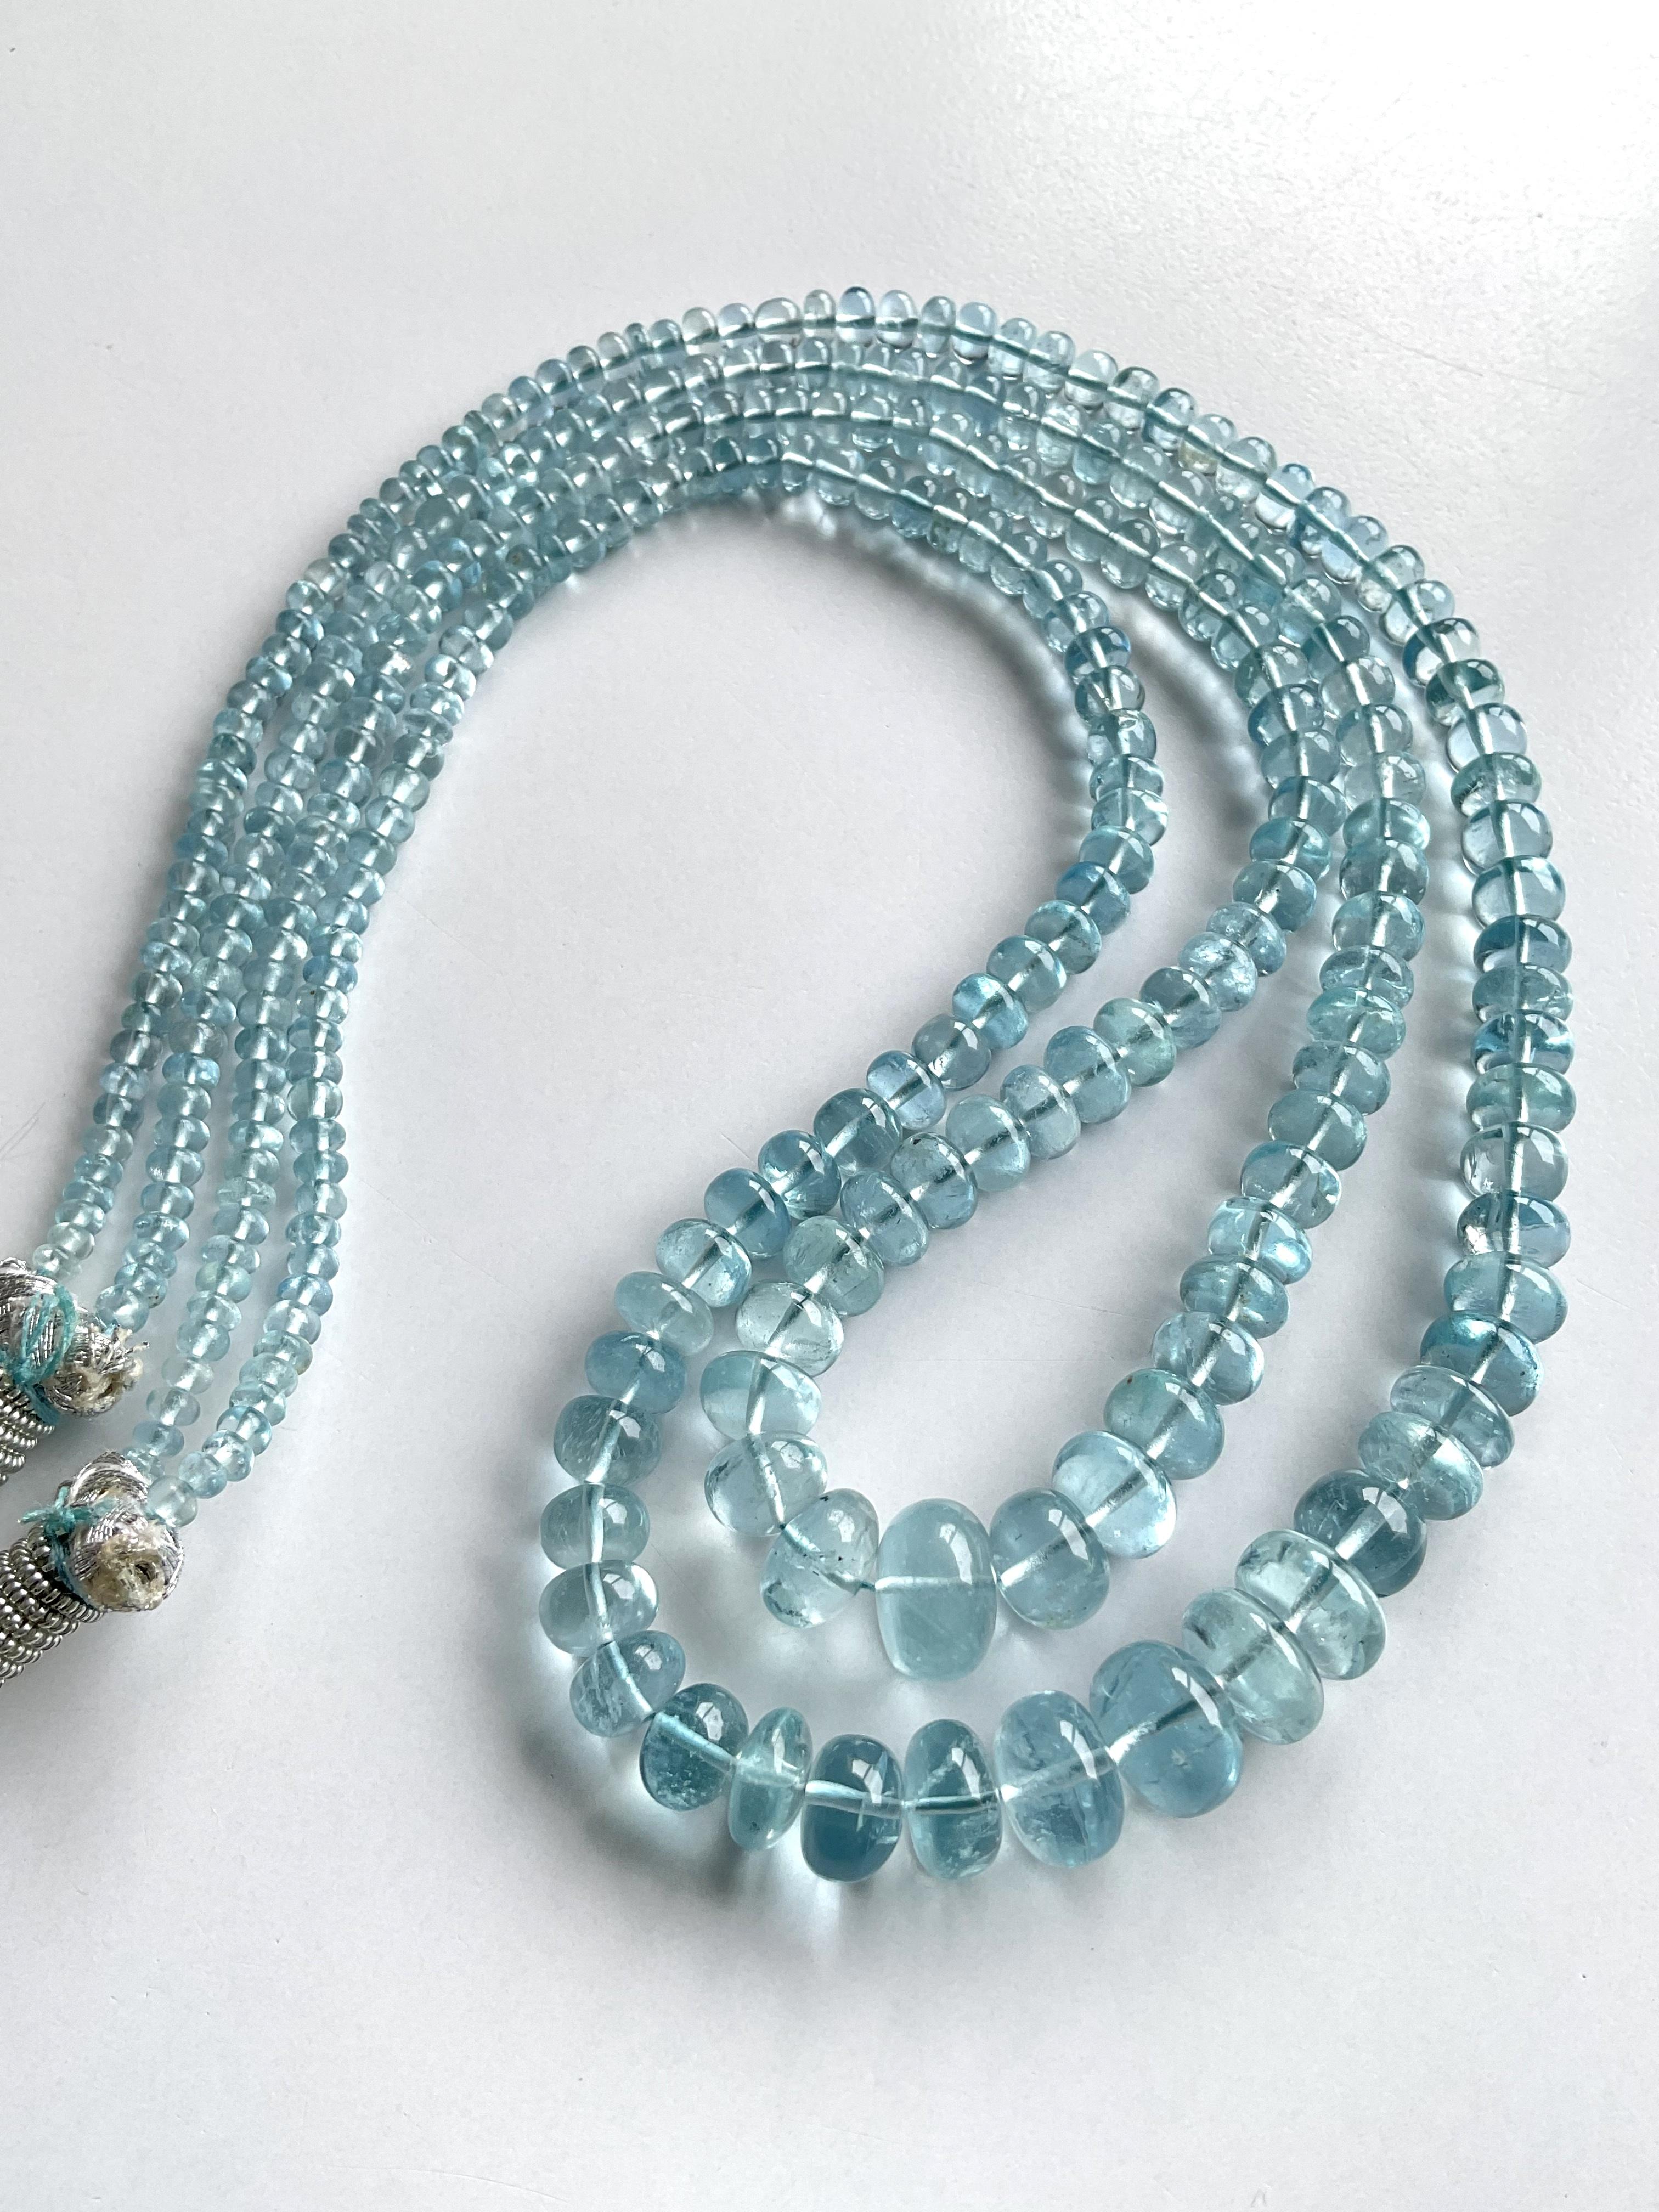 198.75 Carats Aquamarine Necklace Beads 2 Strands Top Quality Natural Gemstones For Sale 1